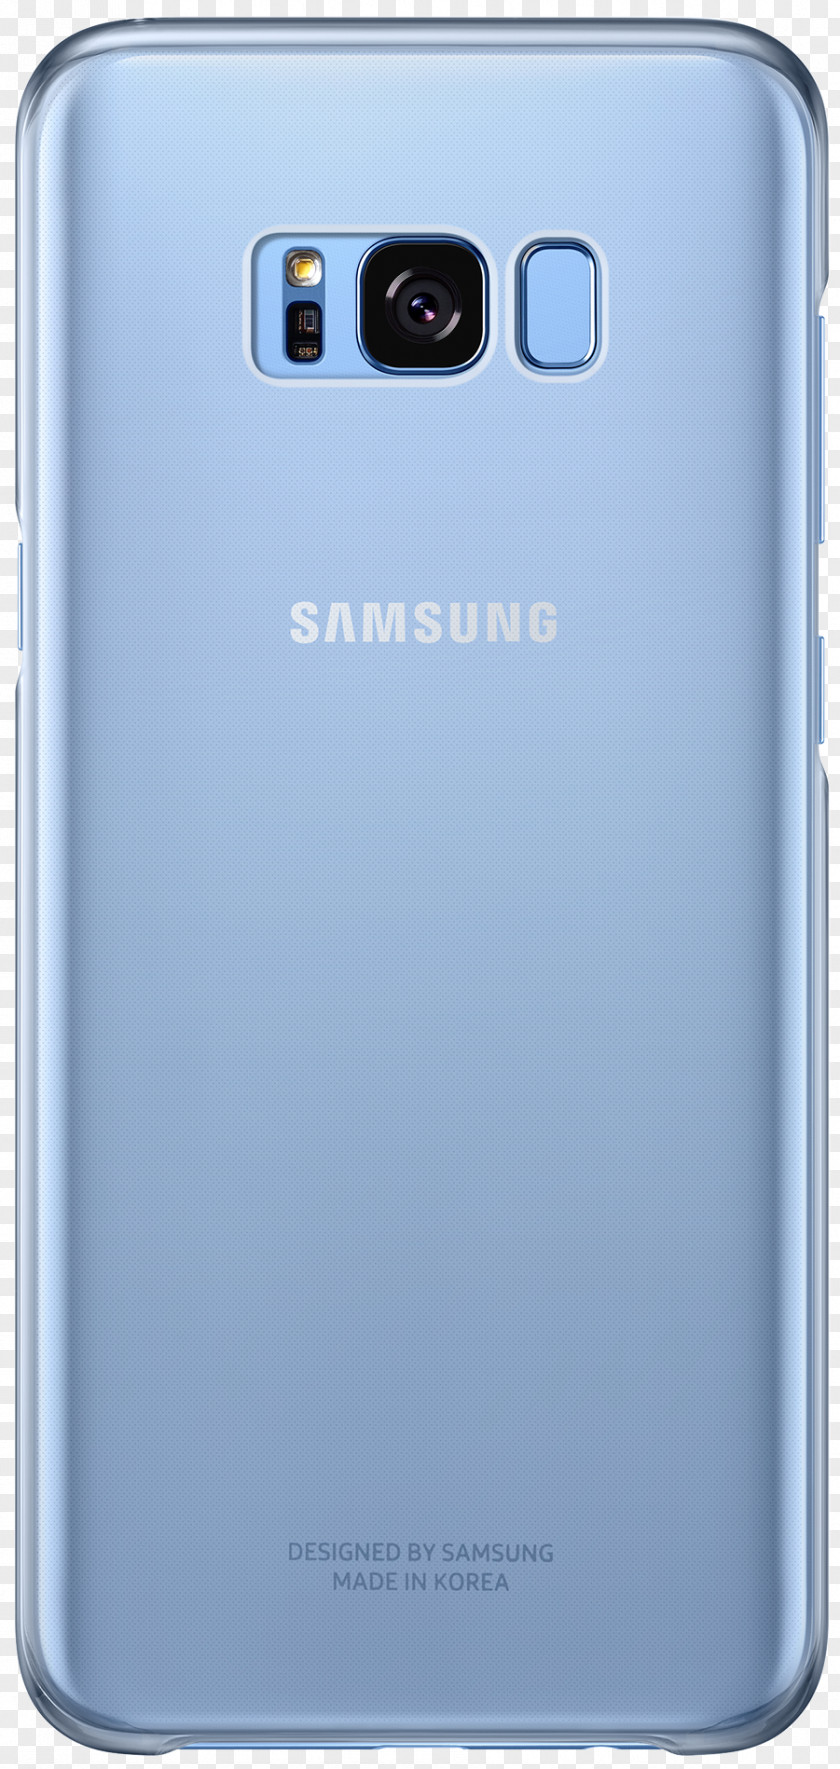 Edge Samsung Telephone Price Android Coral Blue PNG